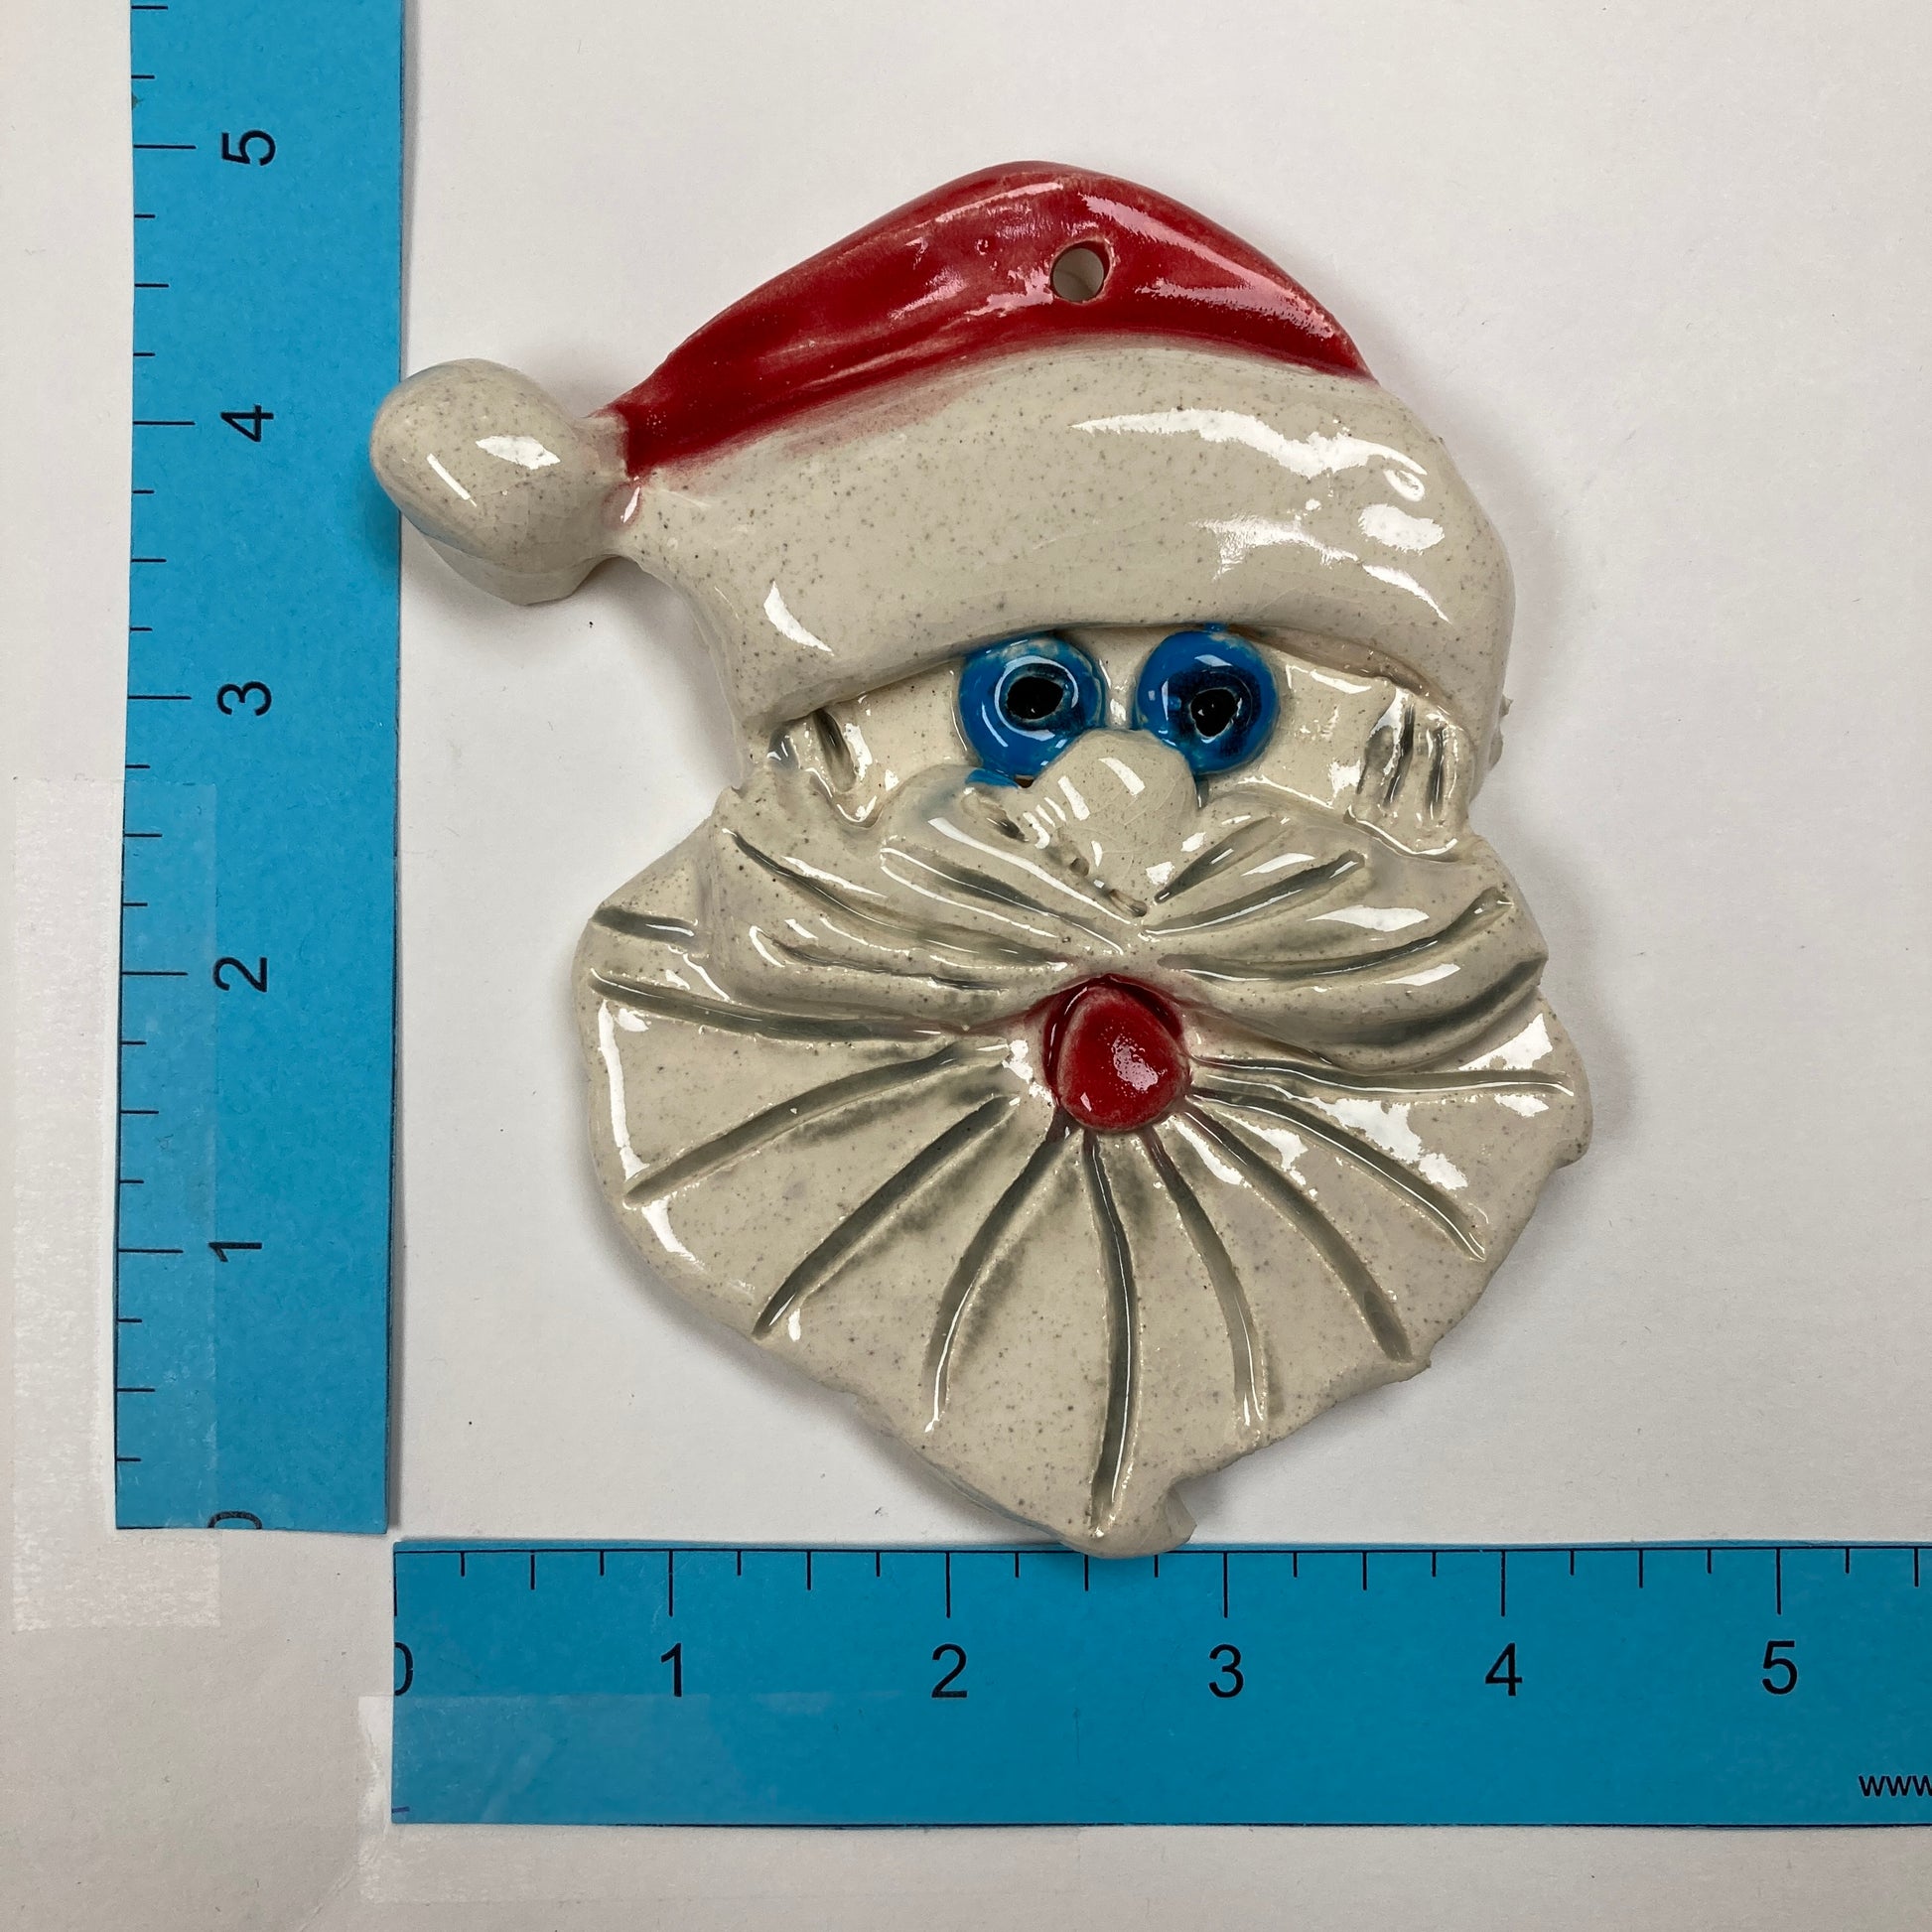 WATCH Resources Art Guild - Ceramic Arts Handmade Clay Crafts 5-inch x 4.5-inch Glazed Christmas Santa made by Lisa Uptain